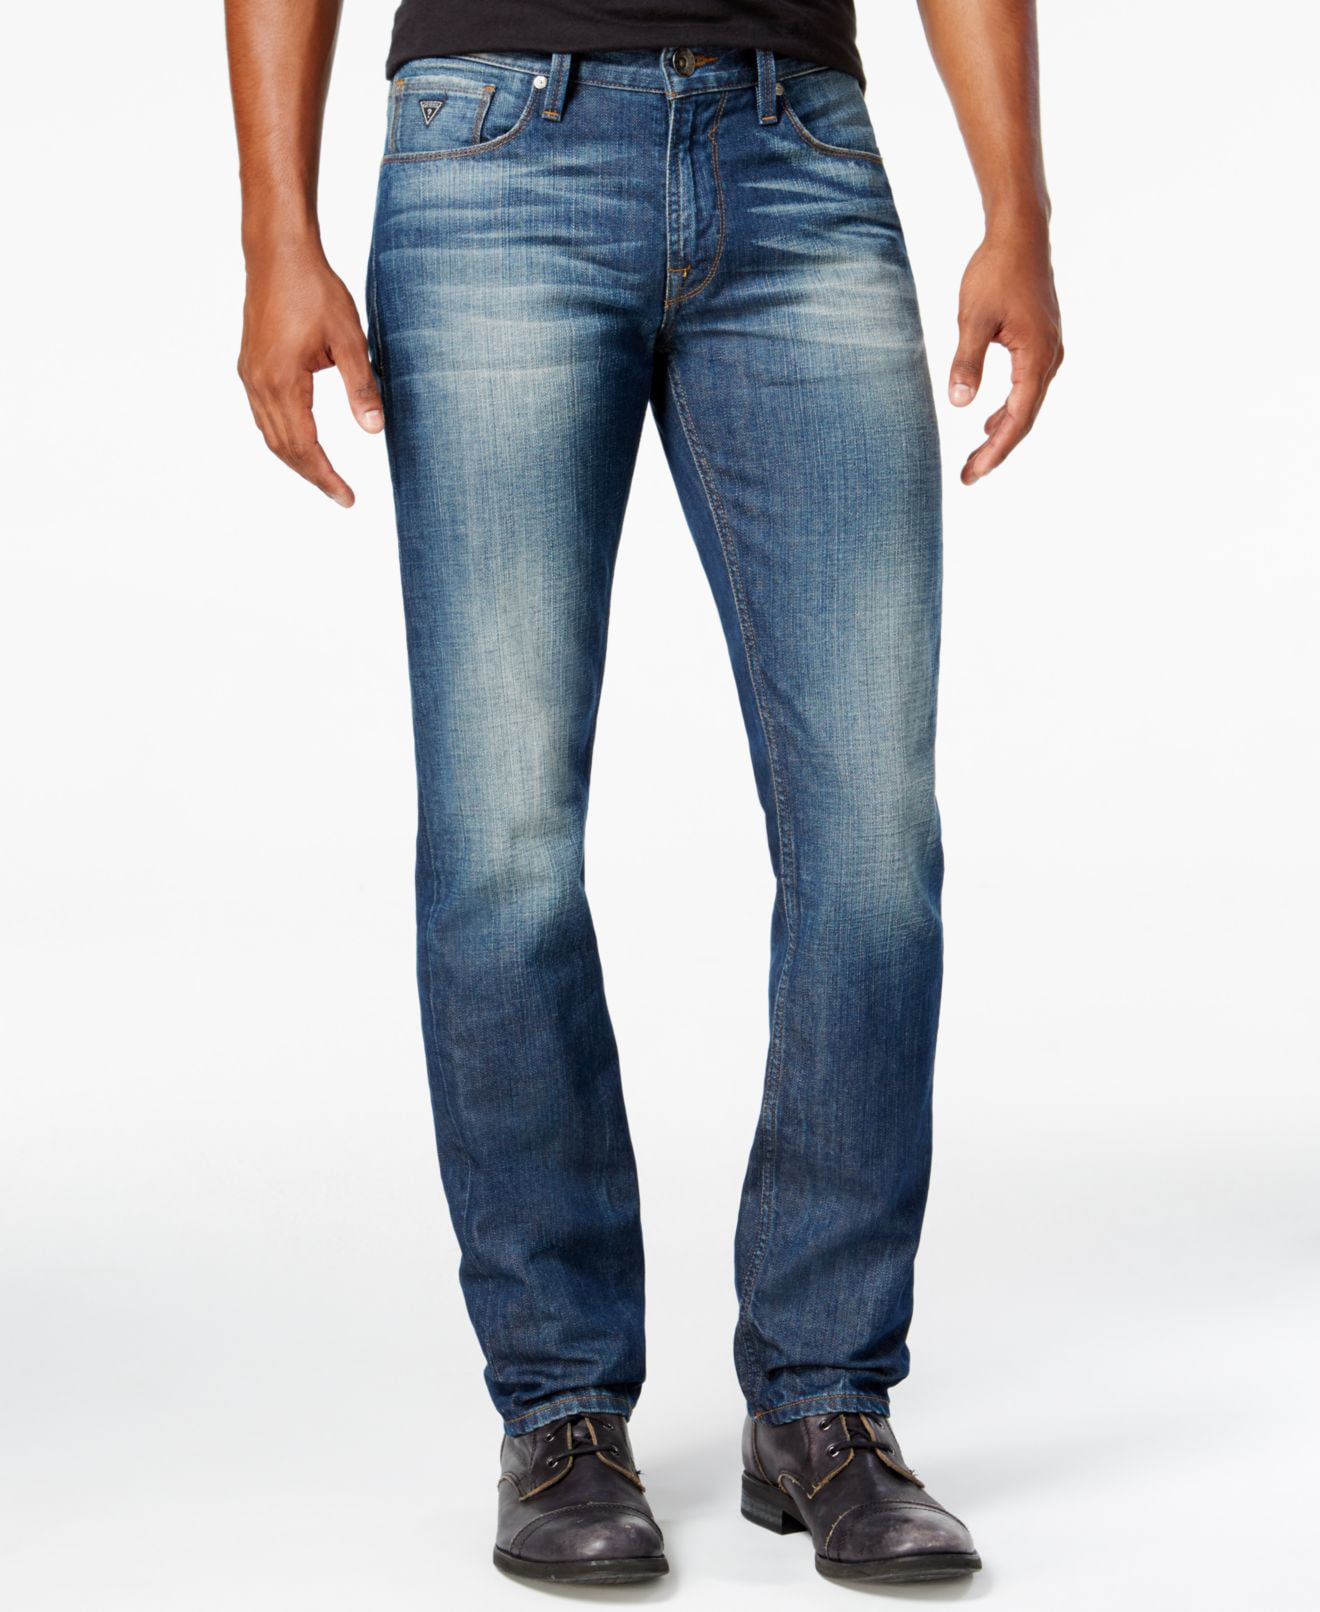 GUESS - NEW Blue Mens Size 32x30 Slim Straight Ridgemont Washed Jeans ...